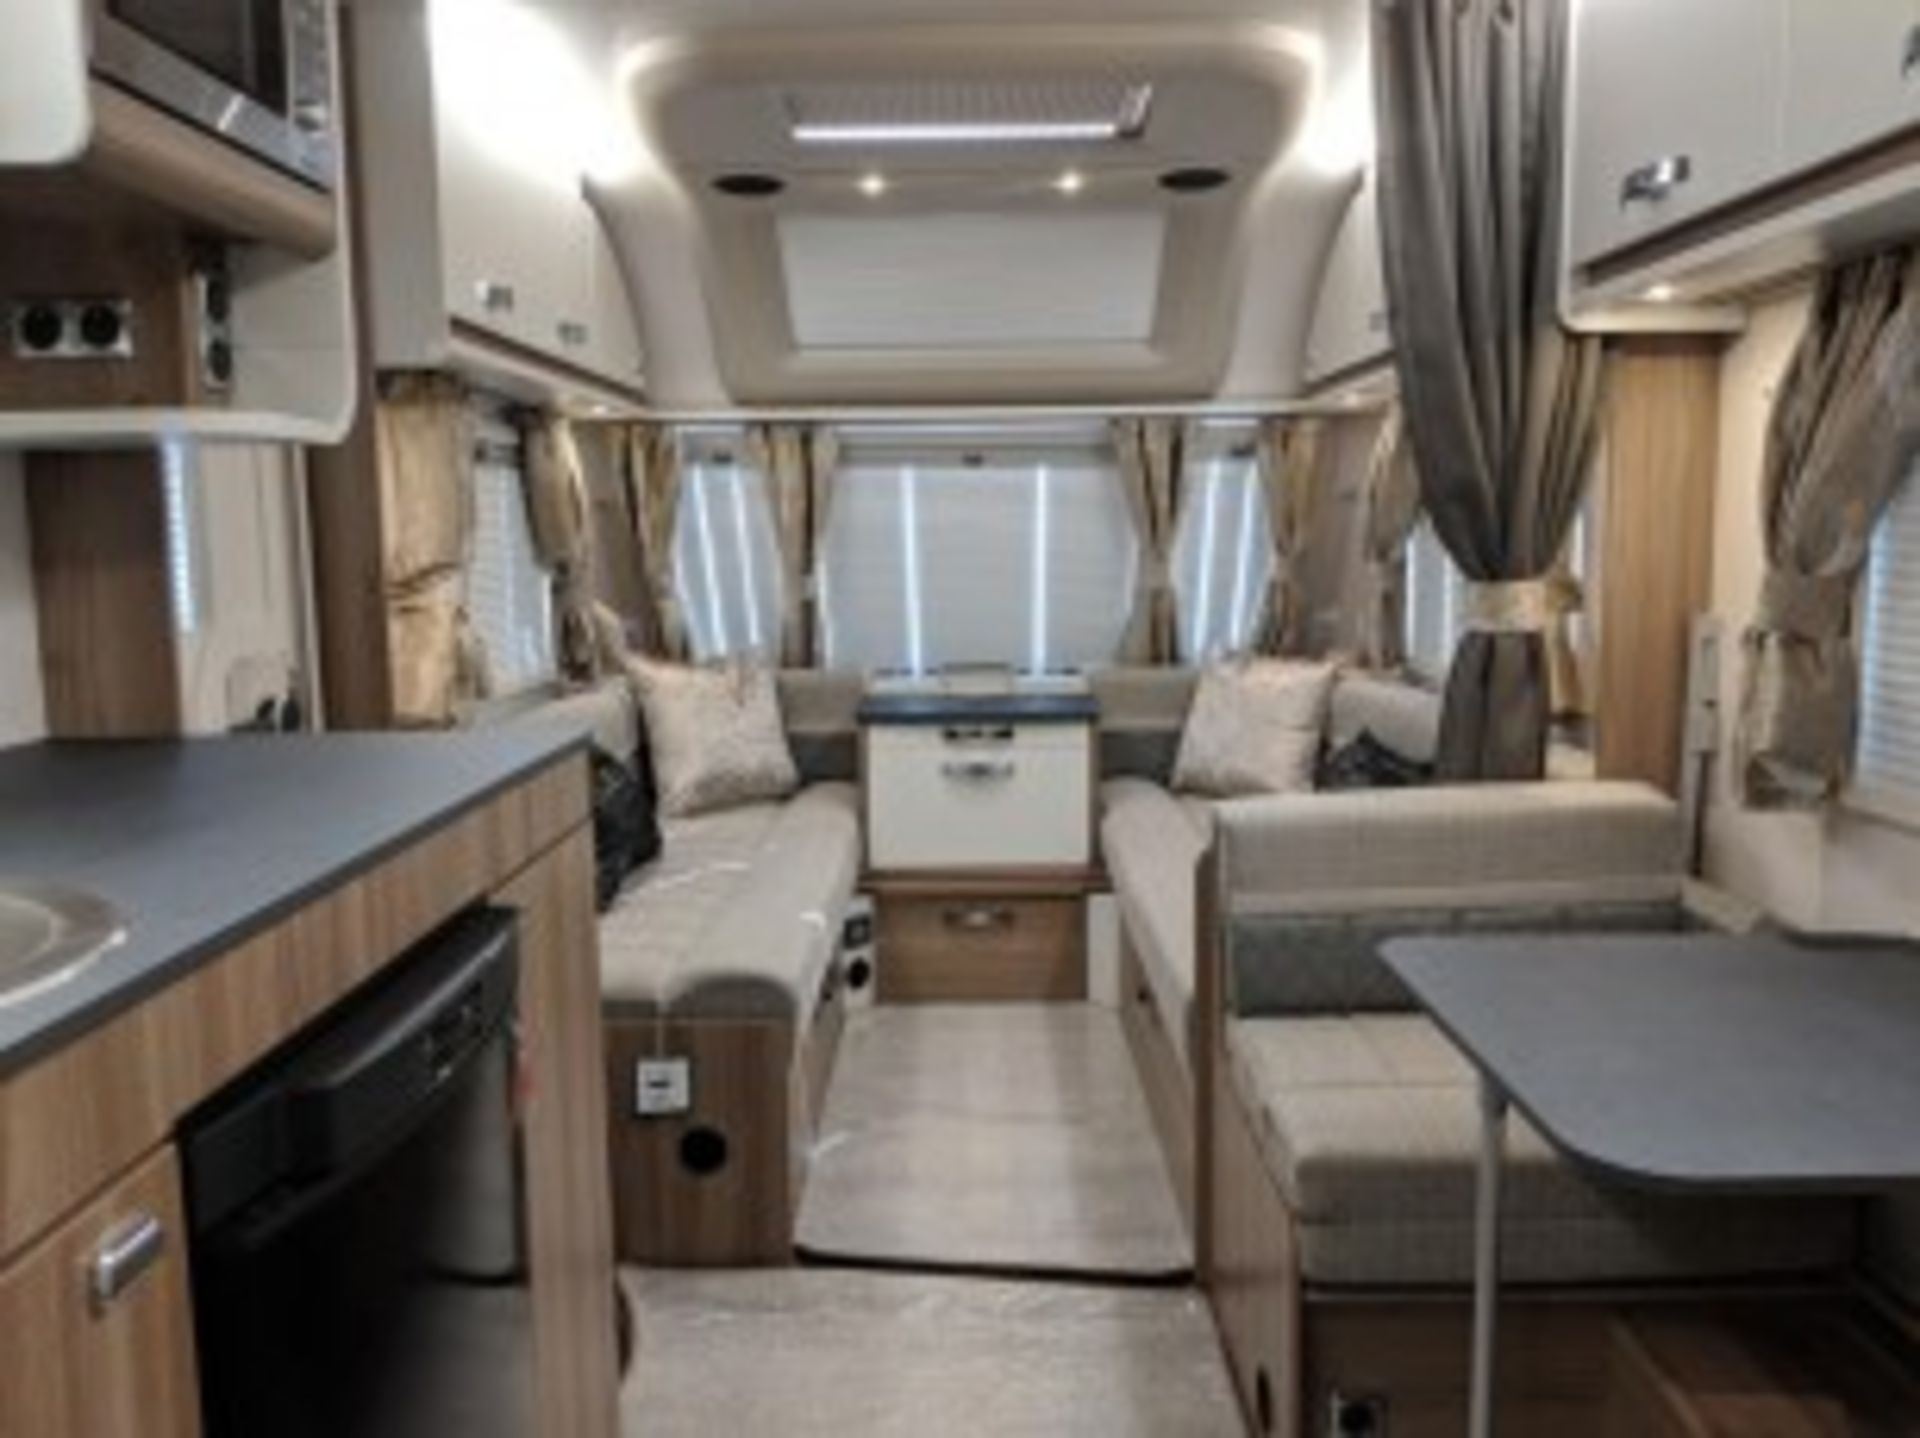 SWIFT AVENTURA "SPECIAL EDITION" EW WITH FIXED BED - TWIN AXEL - NEW / UNUSED - 6 BERTH - LOOK!!! - Image 2 of 7